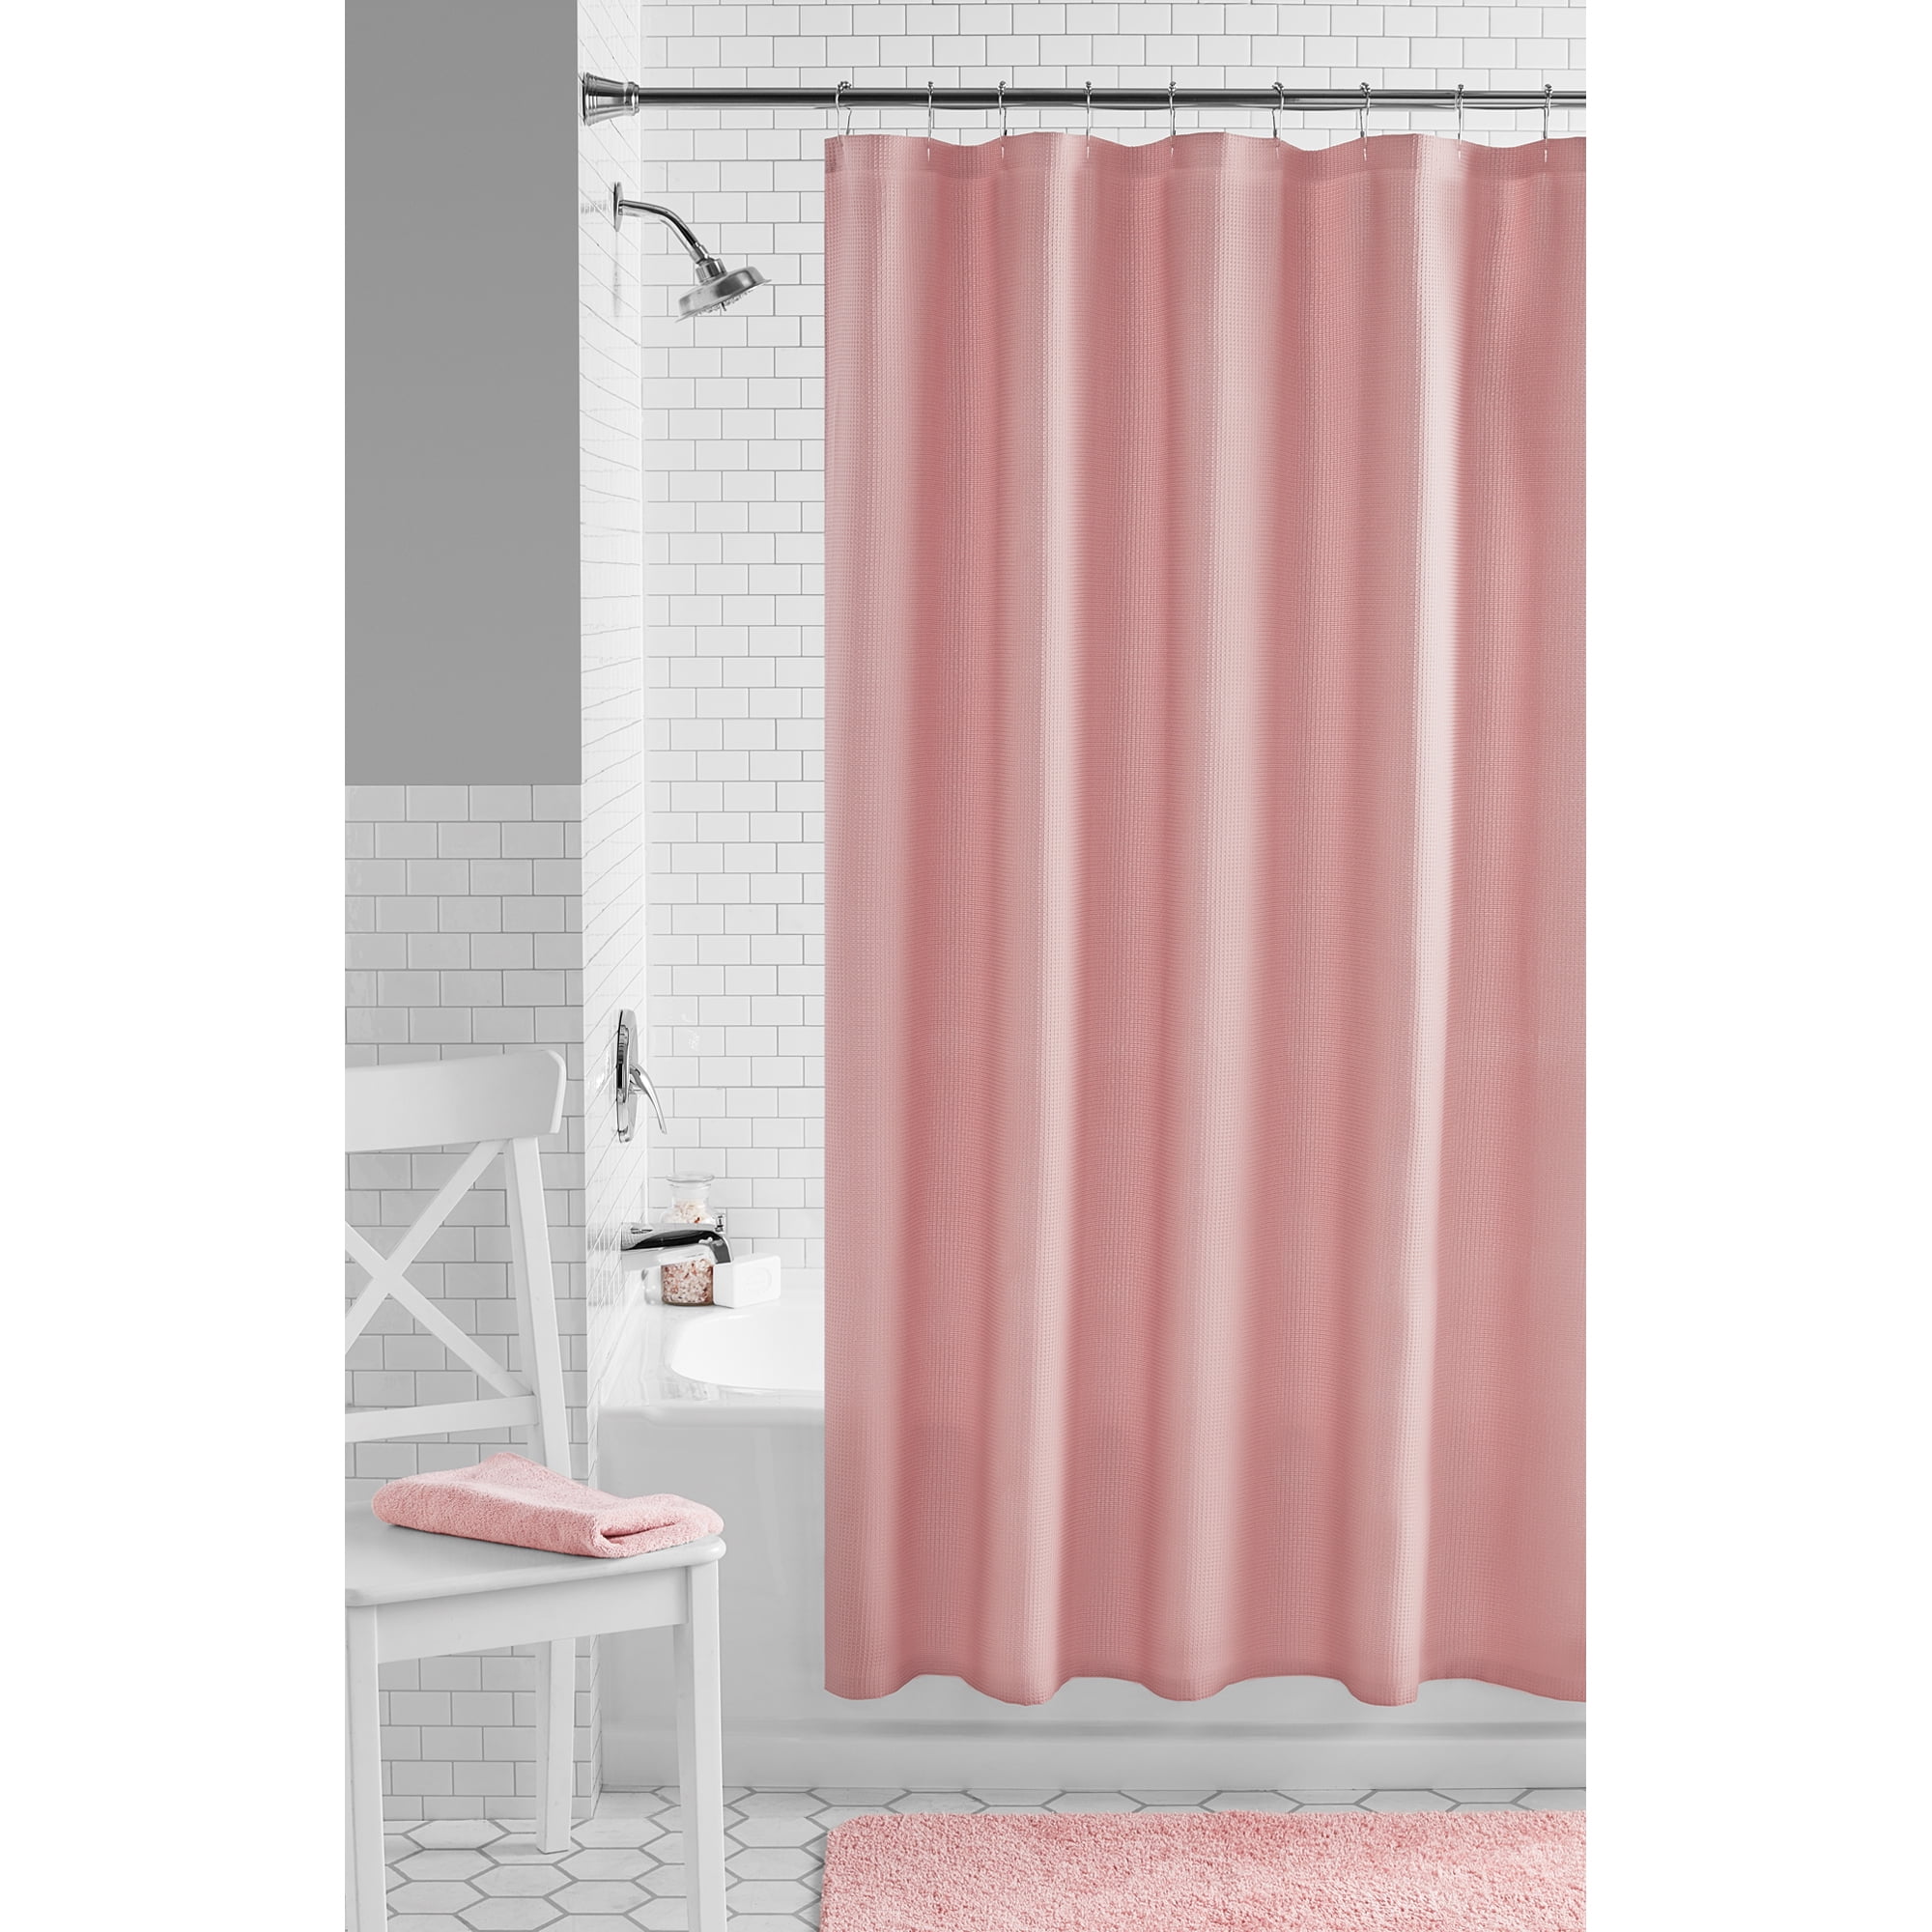 Mainstays Waffle Weave Textured Fabric Shower Curtain, 72" x 72", Dusty Rose Pink